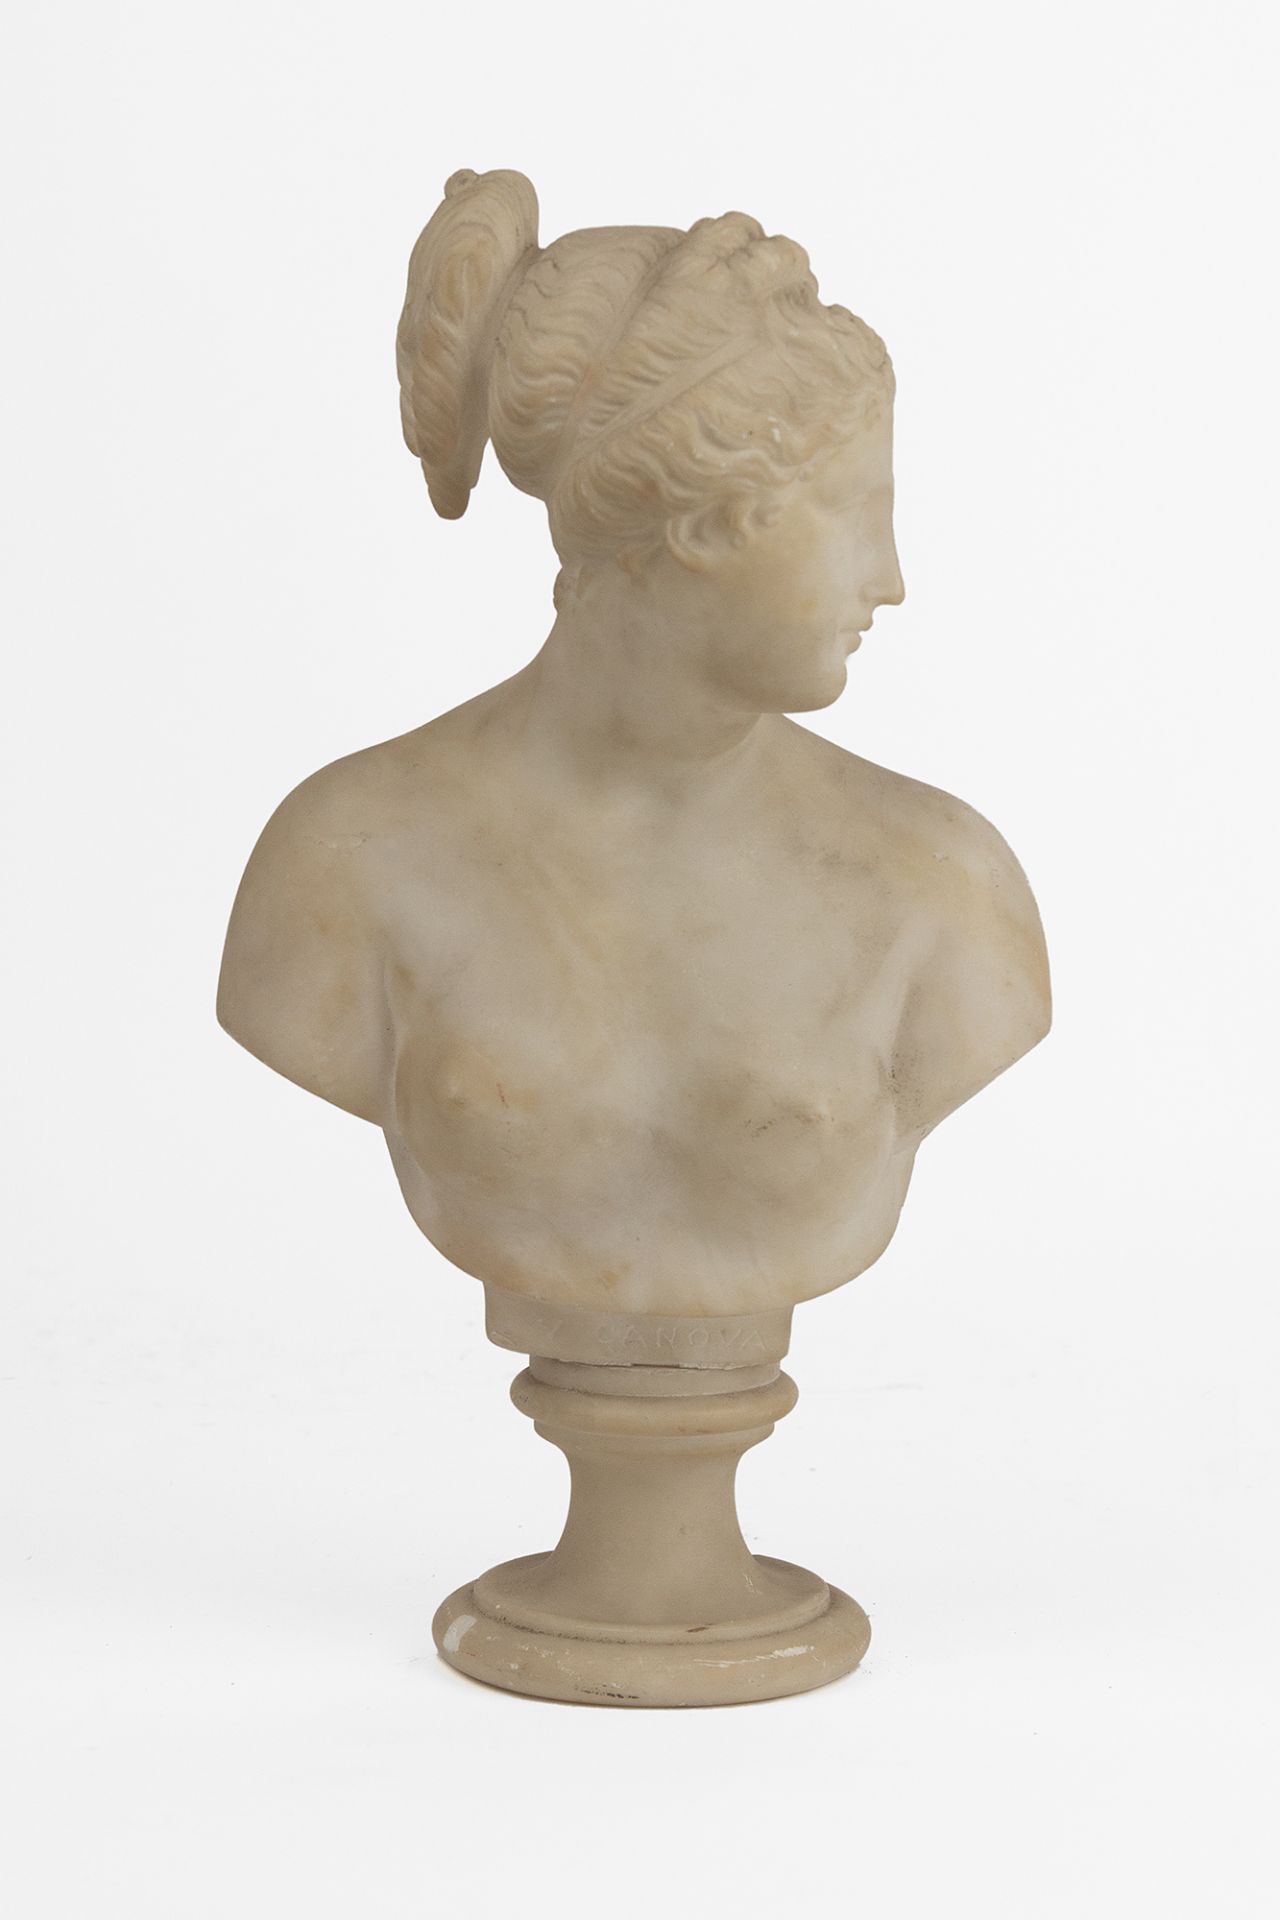 A first half of 20th century bust of Capitoline Venus in marble dust